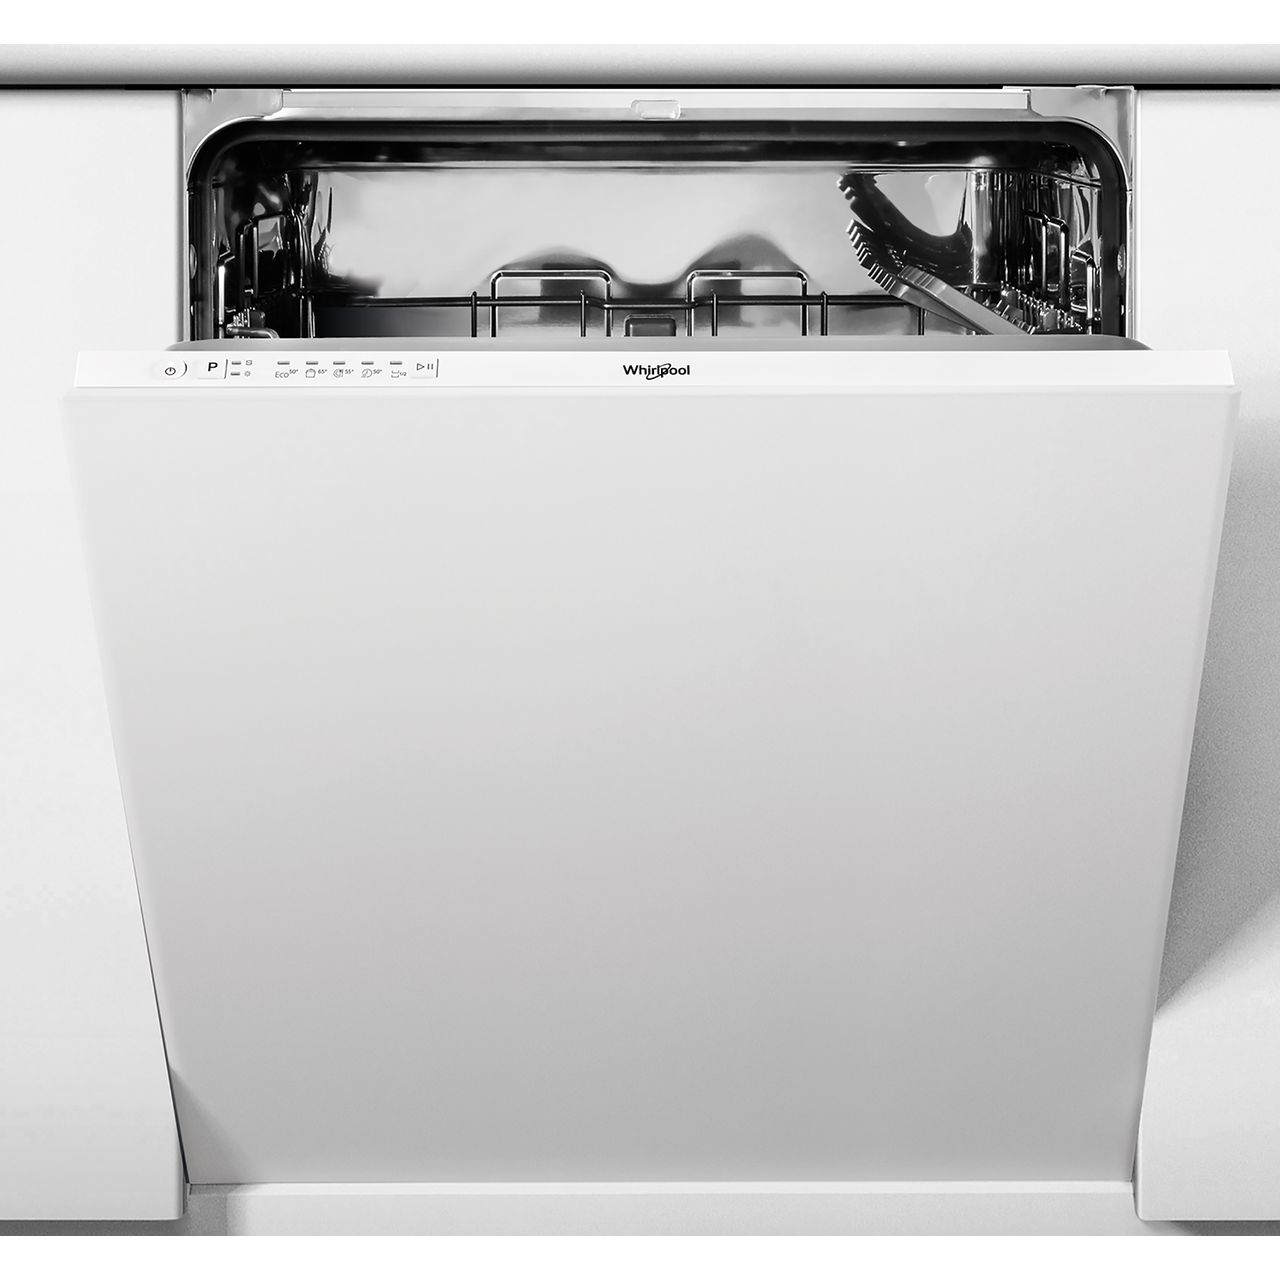 Whirlpool WIE2B19NUK Fully Integrated Standard Dishwasher Review